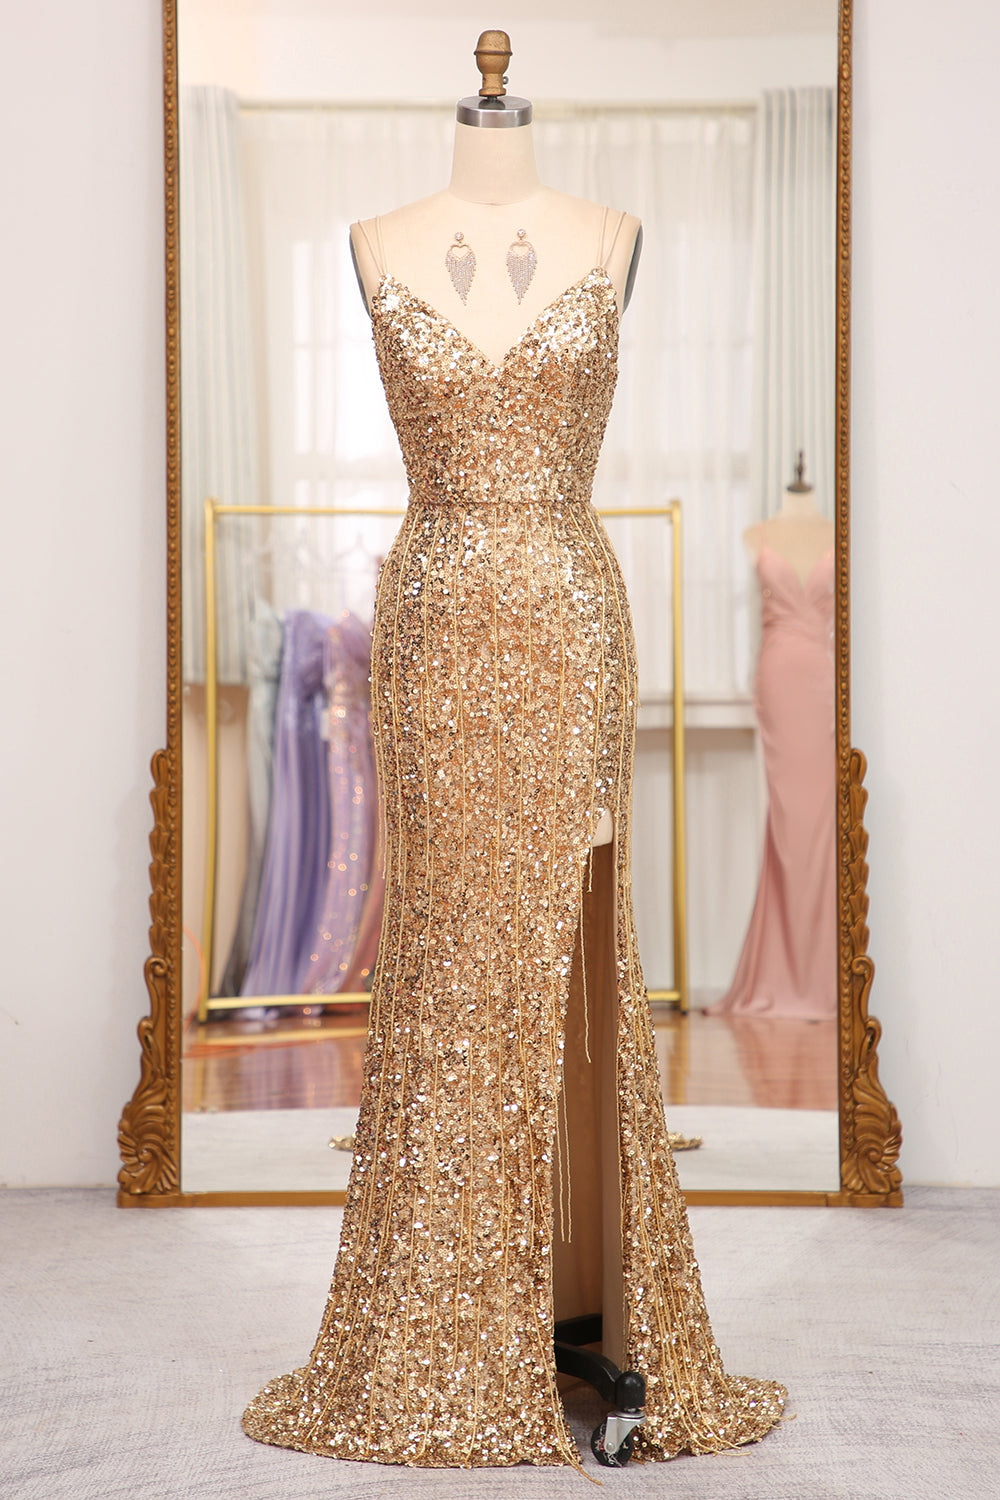 Sparkly Golden Mermaid Long Prom Dress with Slit